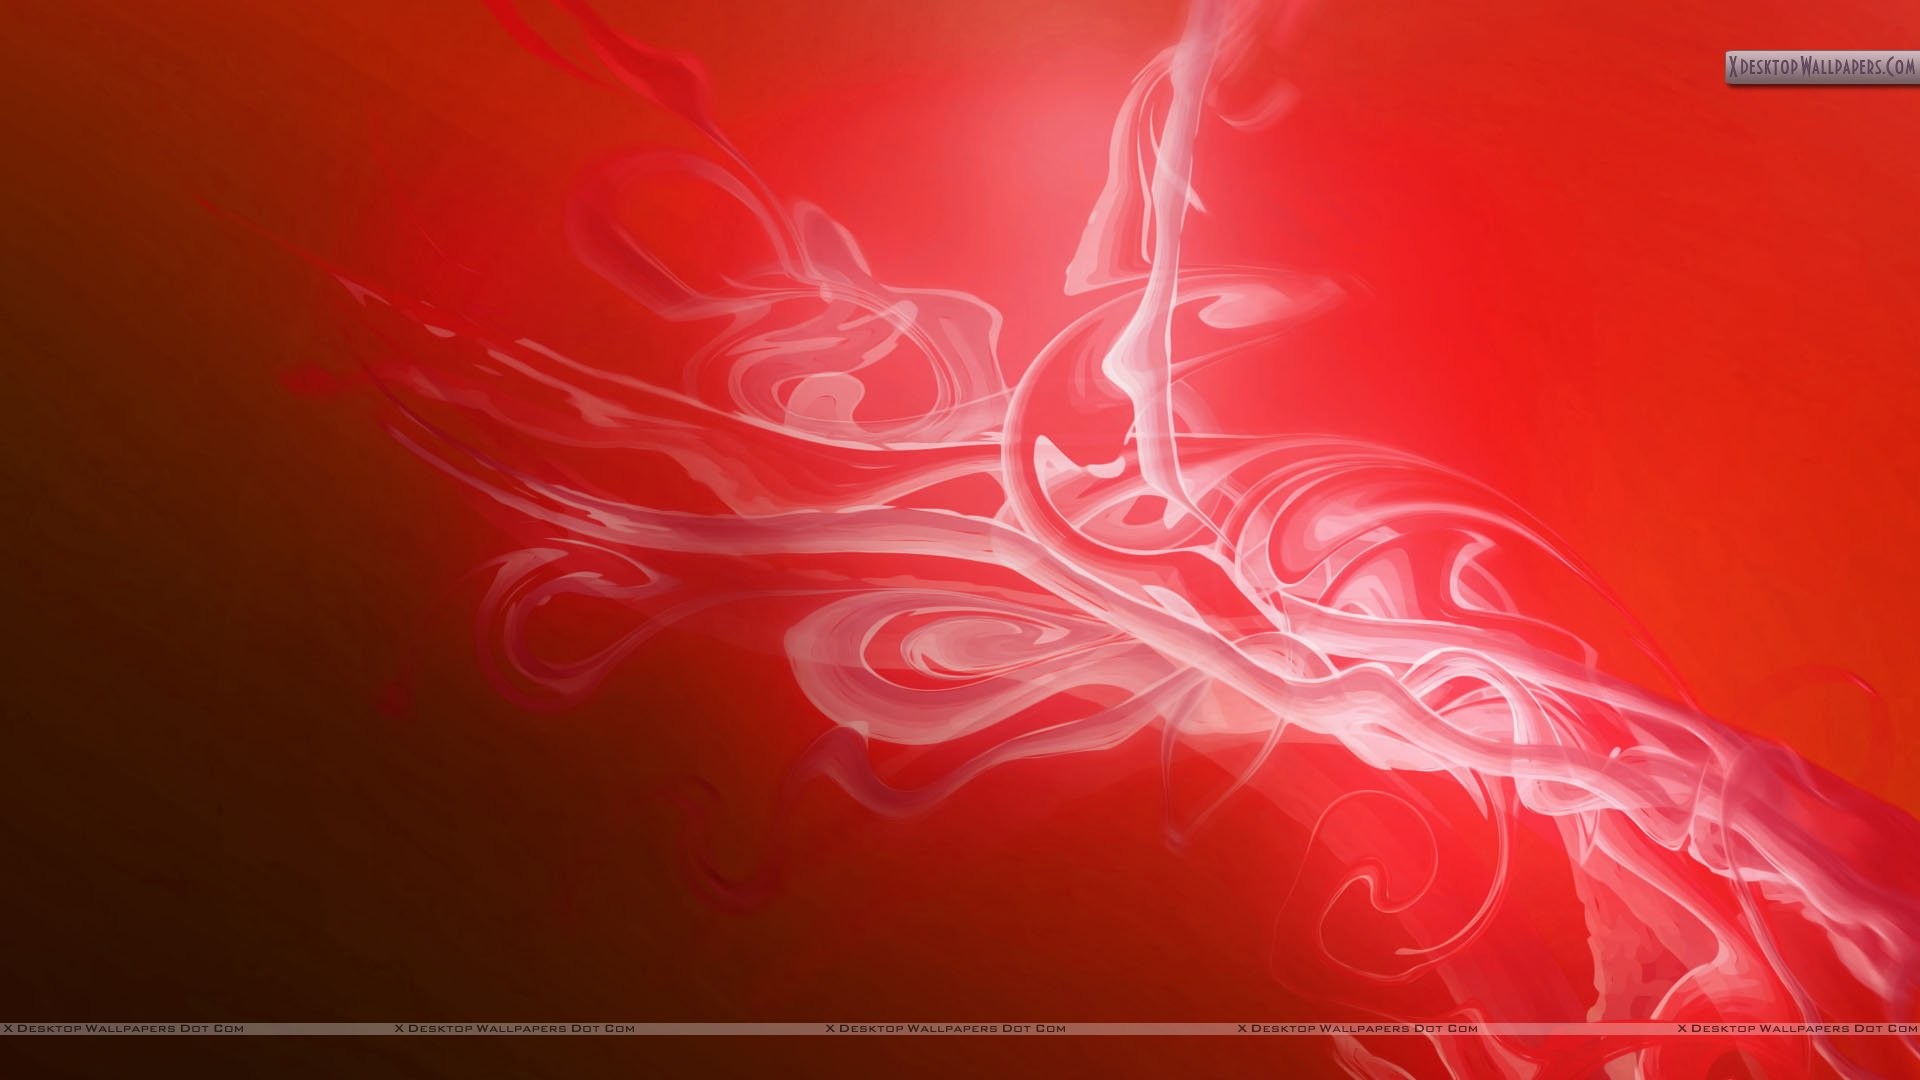 1920x1080 You are viewing wallpaper titled "White Fog On Red ...